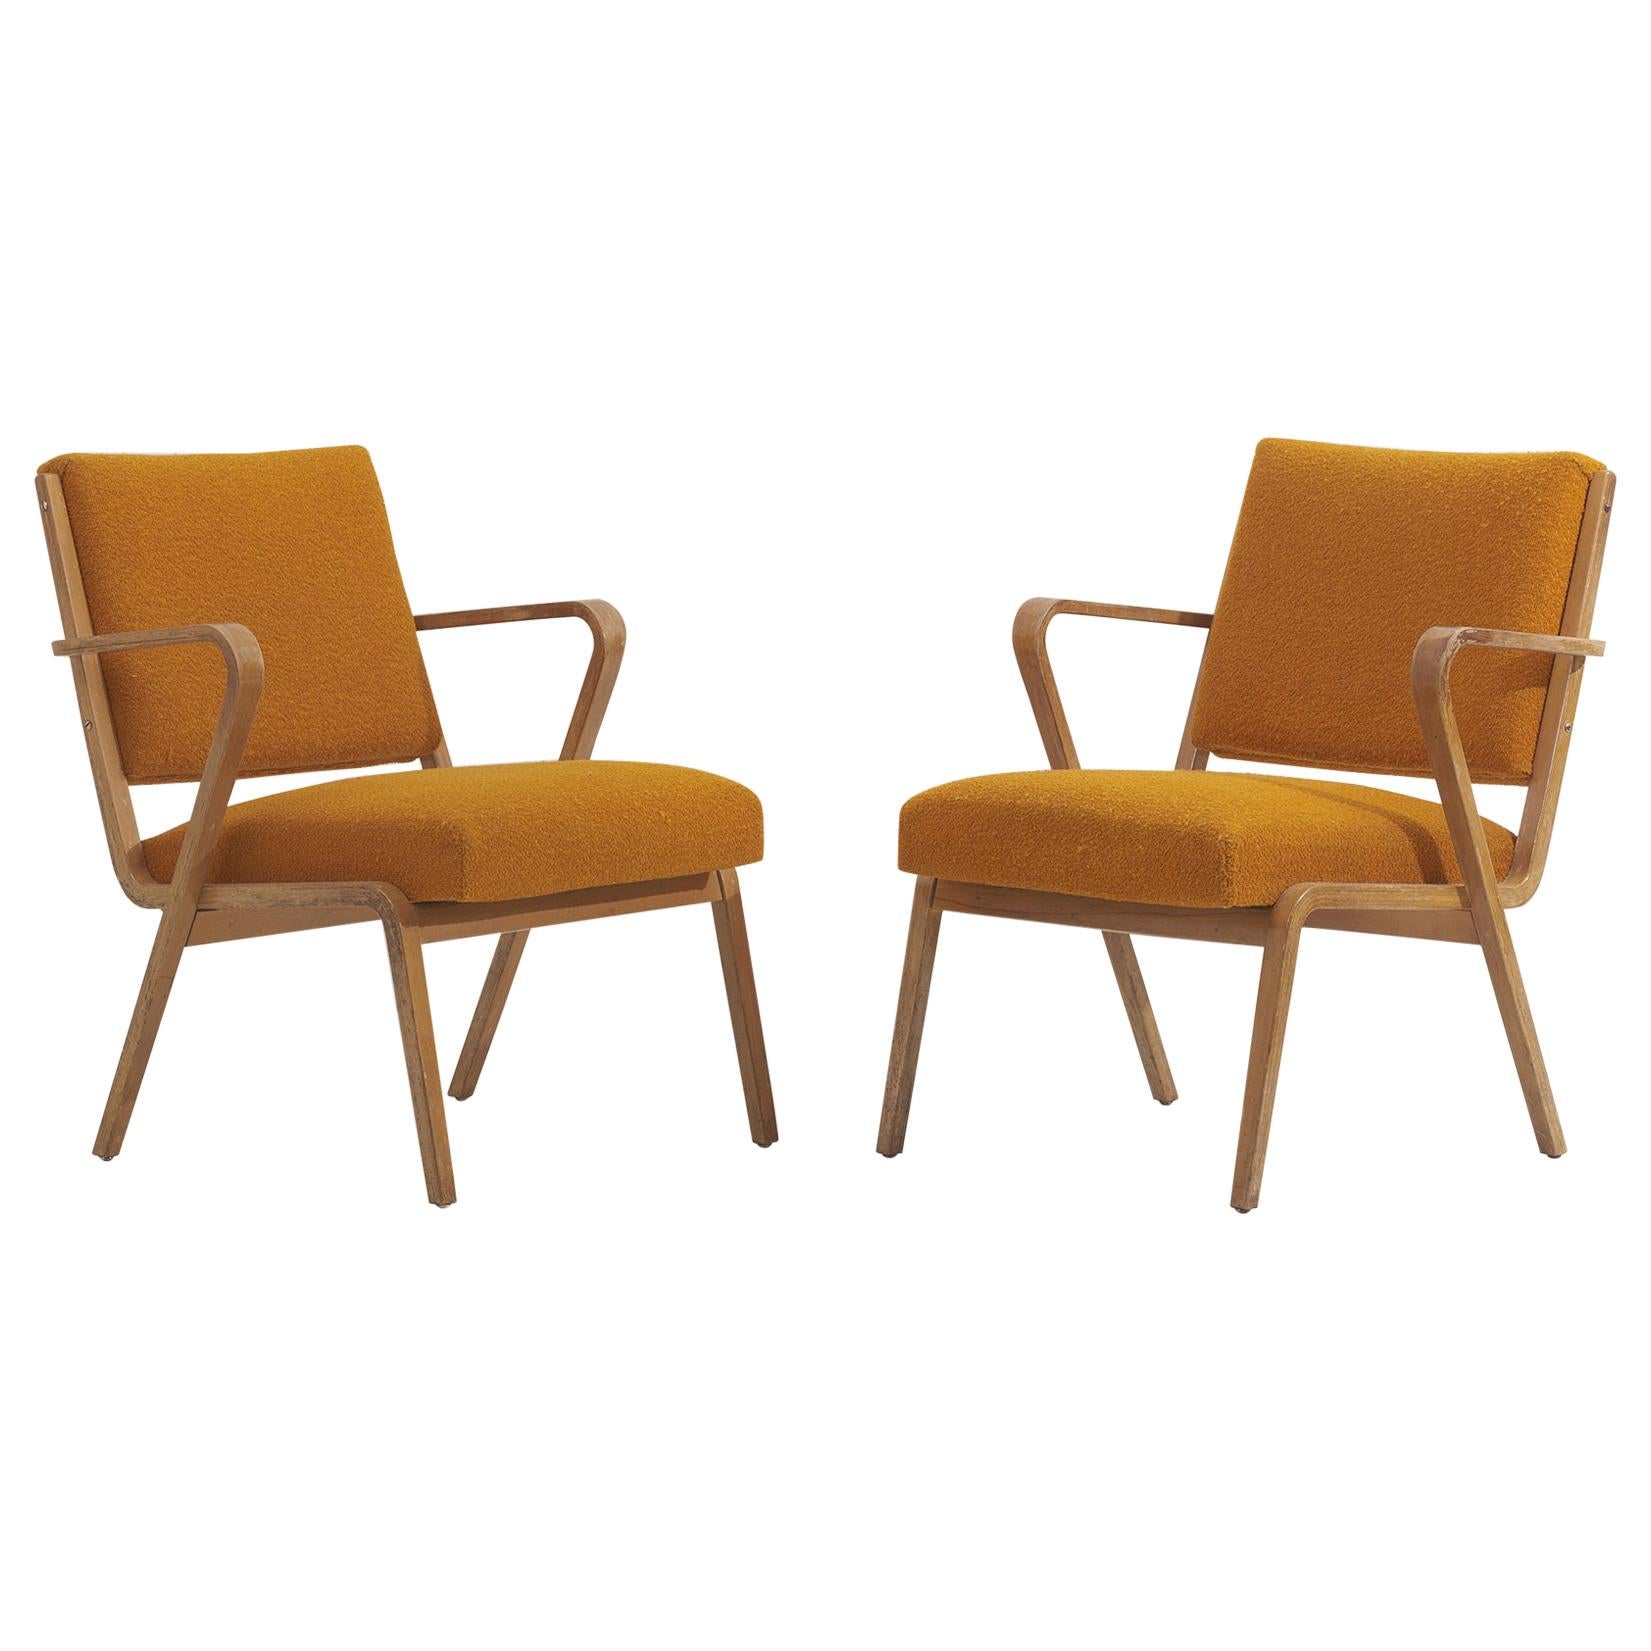 1950s Easy or Lounge Chair Set by Selman Selmanagic in mustard yellow For Sale